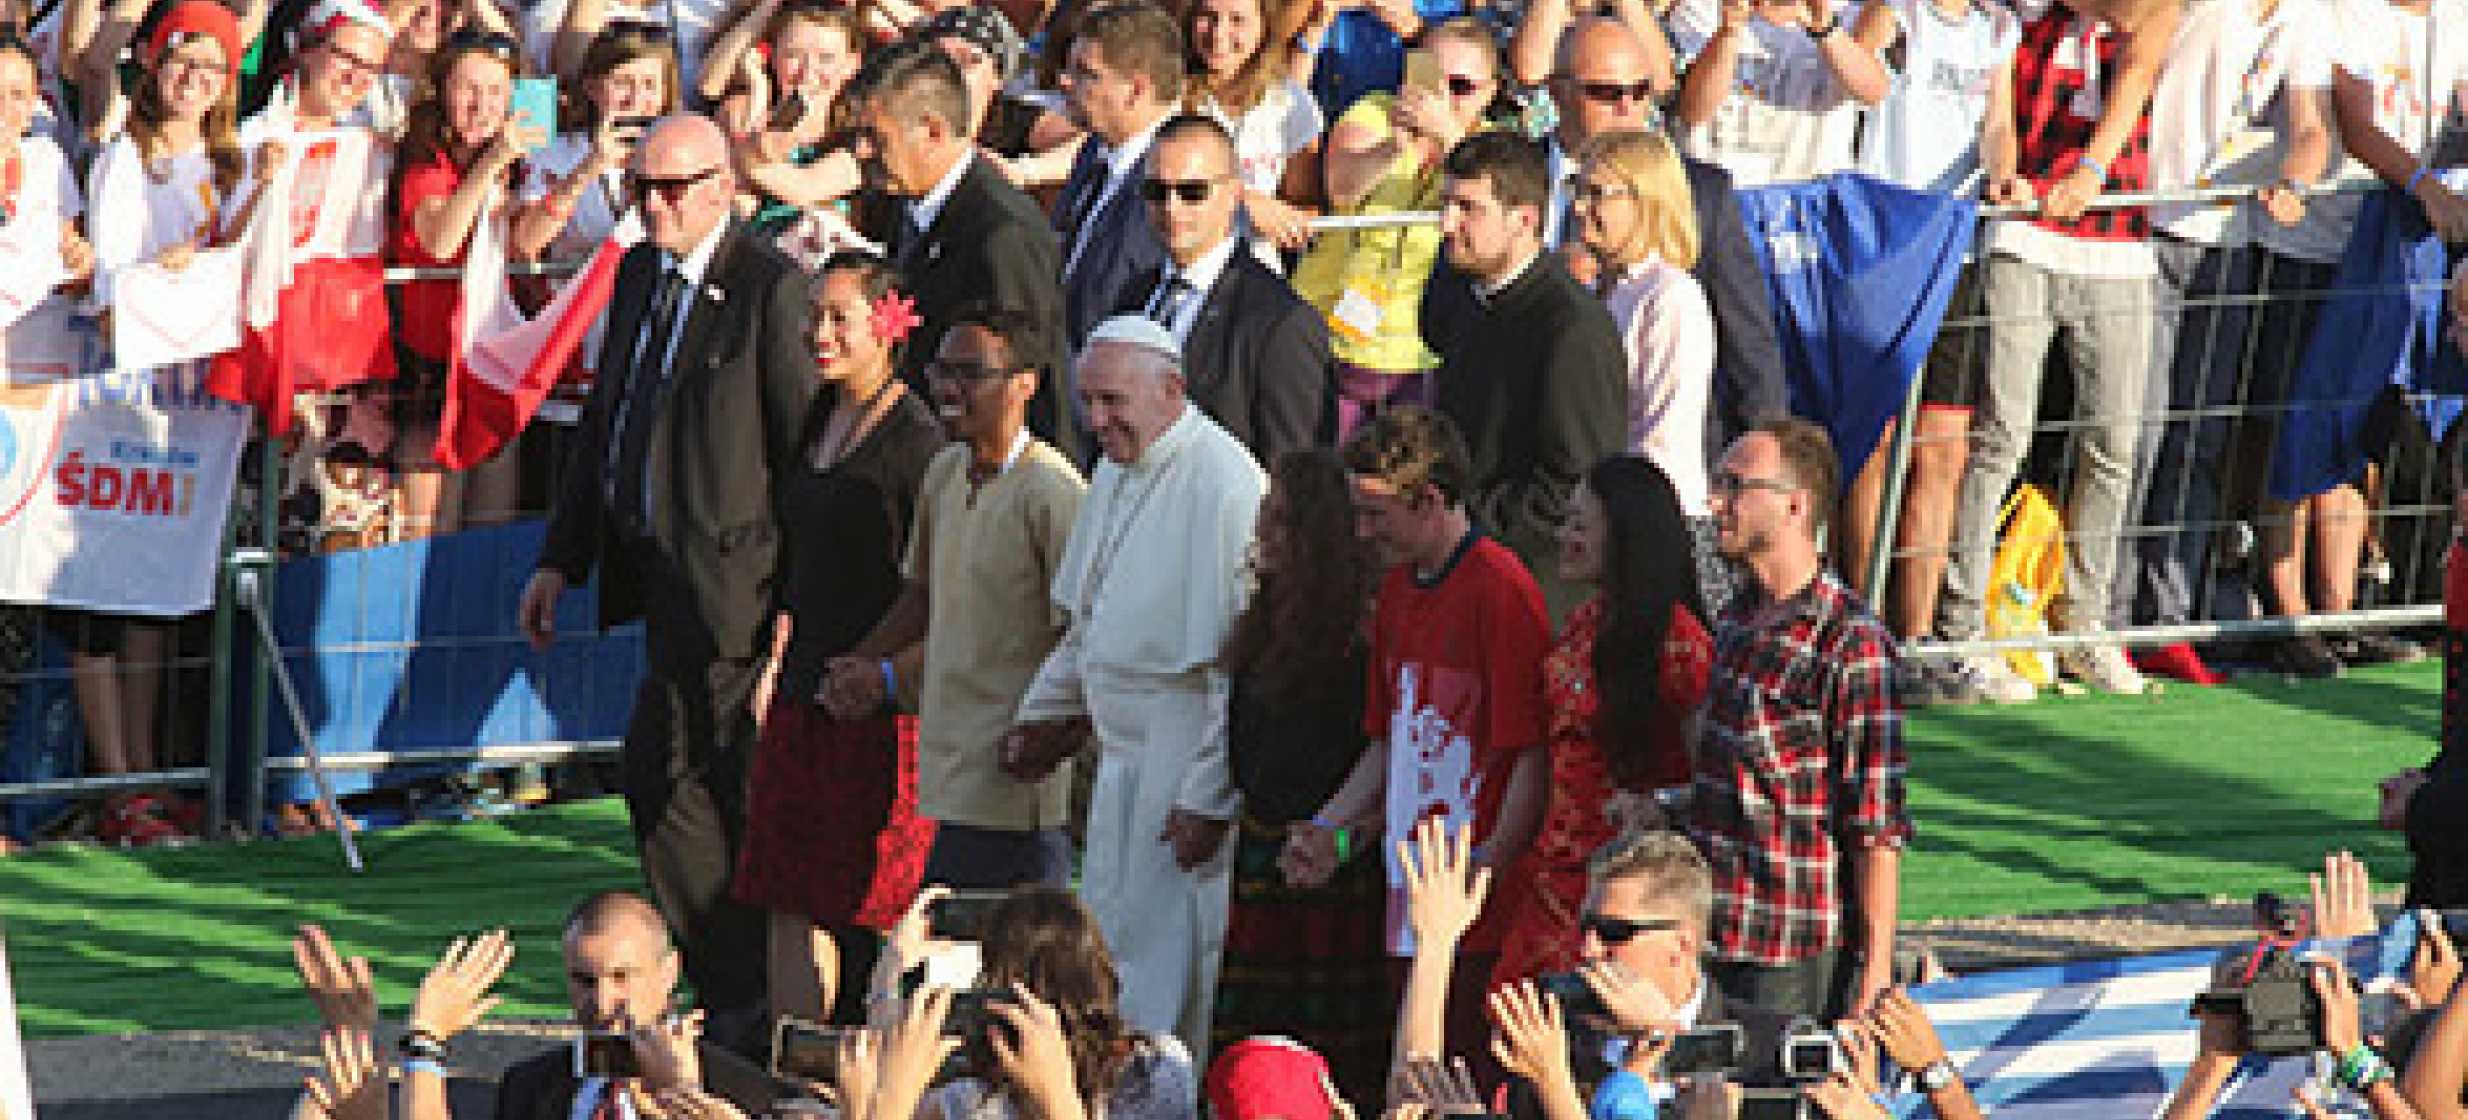 Pope Francis arrives for a July 30 prayer vigil with World Youth Day pilgrims at the Field of Mercy in Krakow, Poland. (CNS photo/Bob Roller)